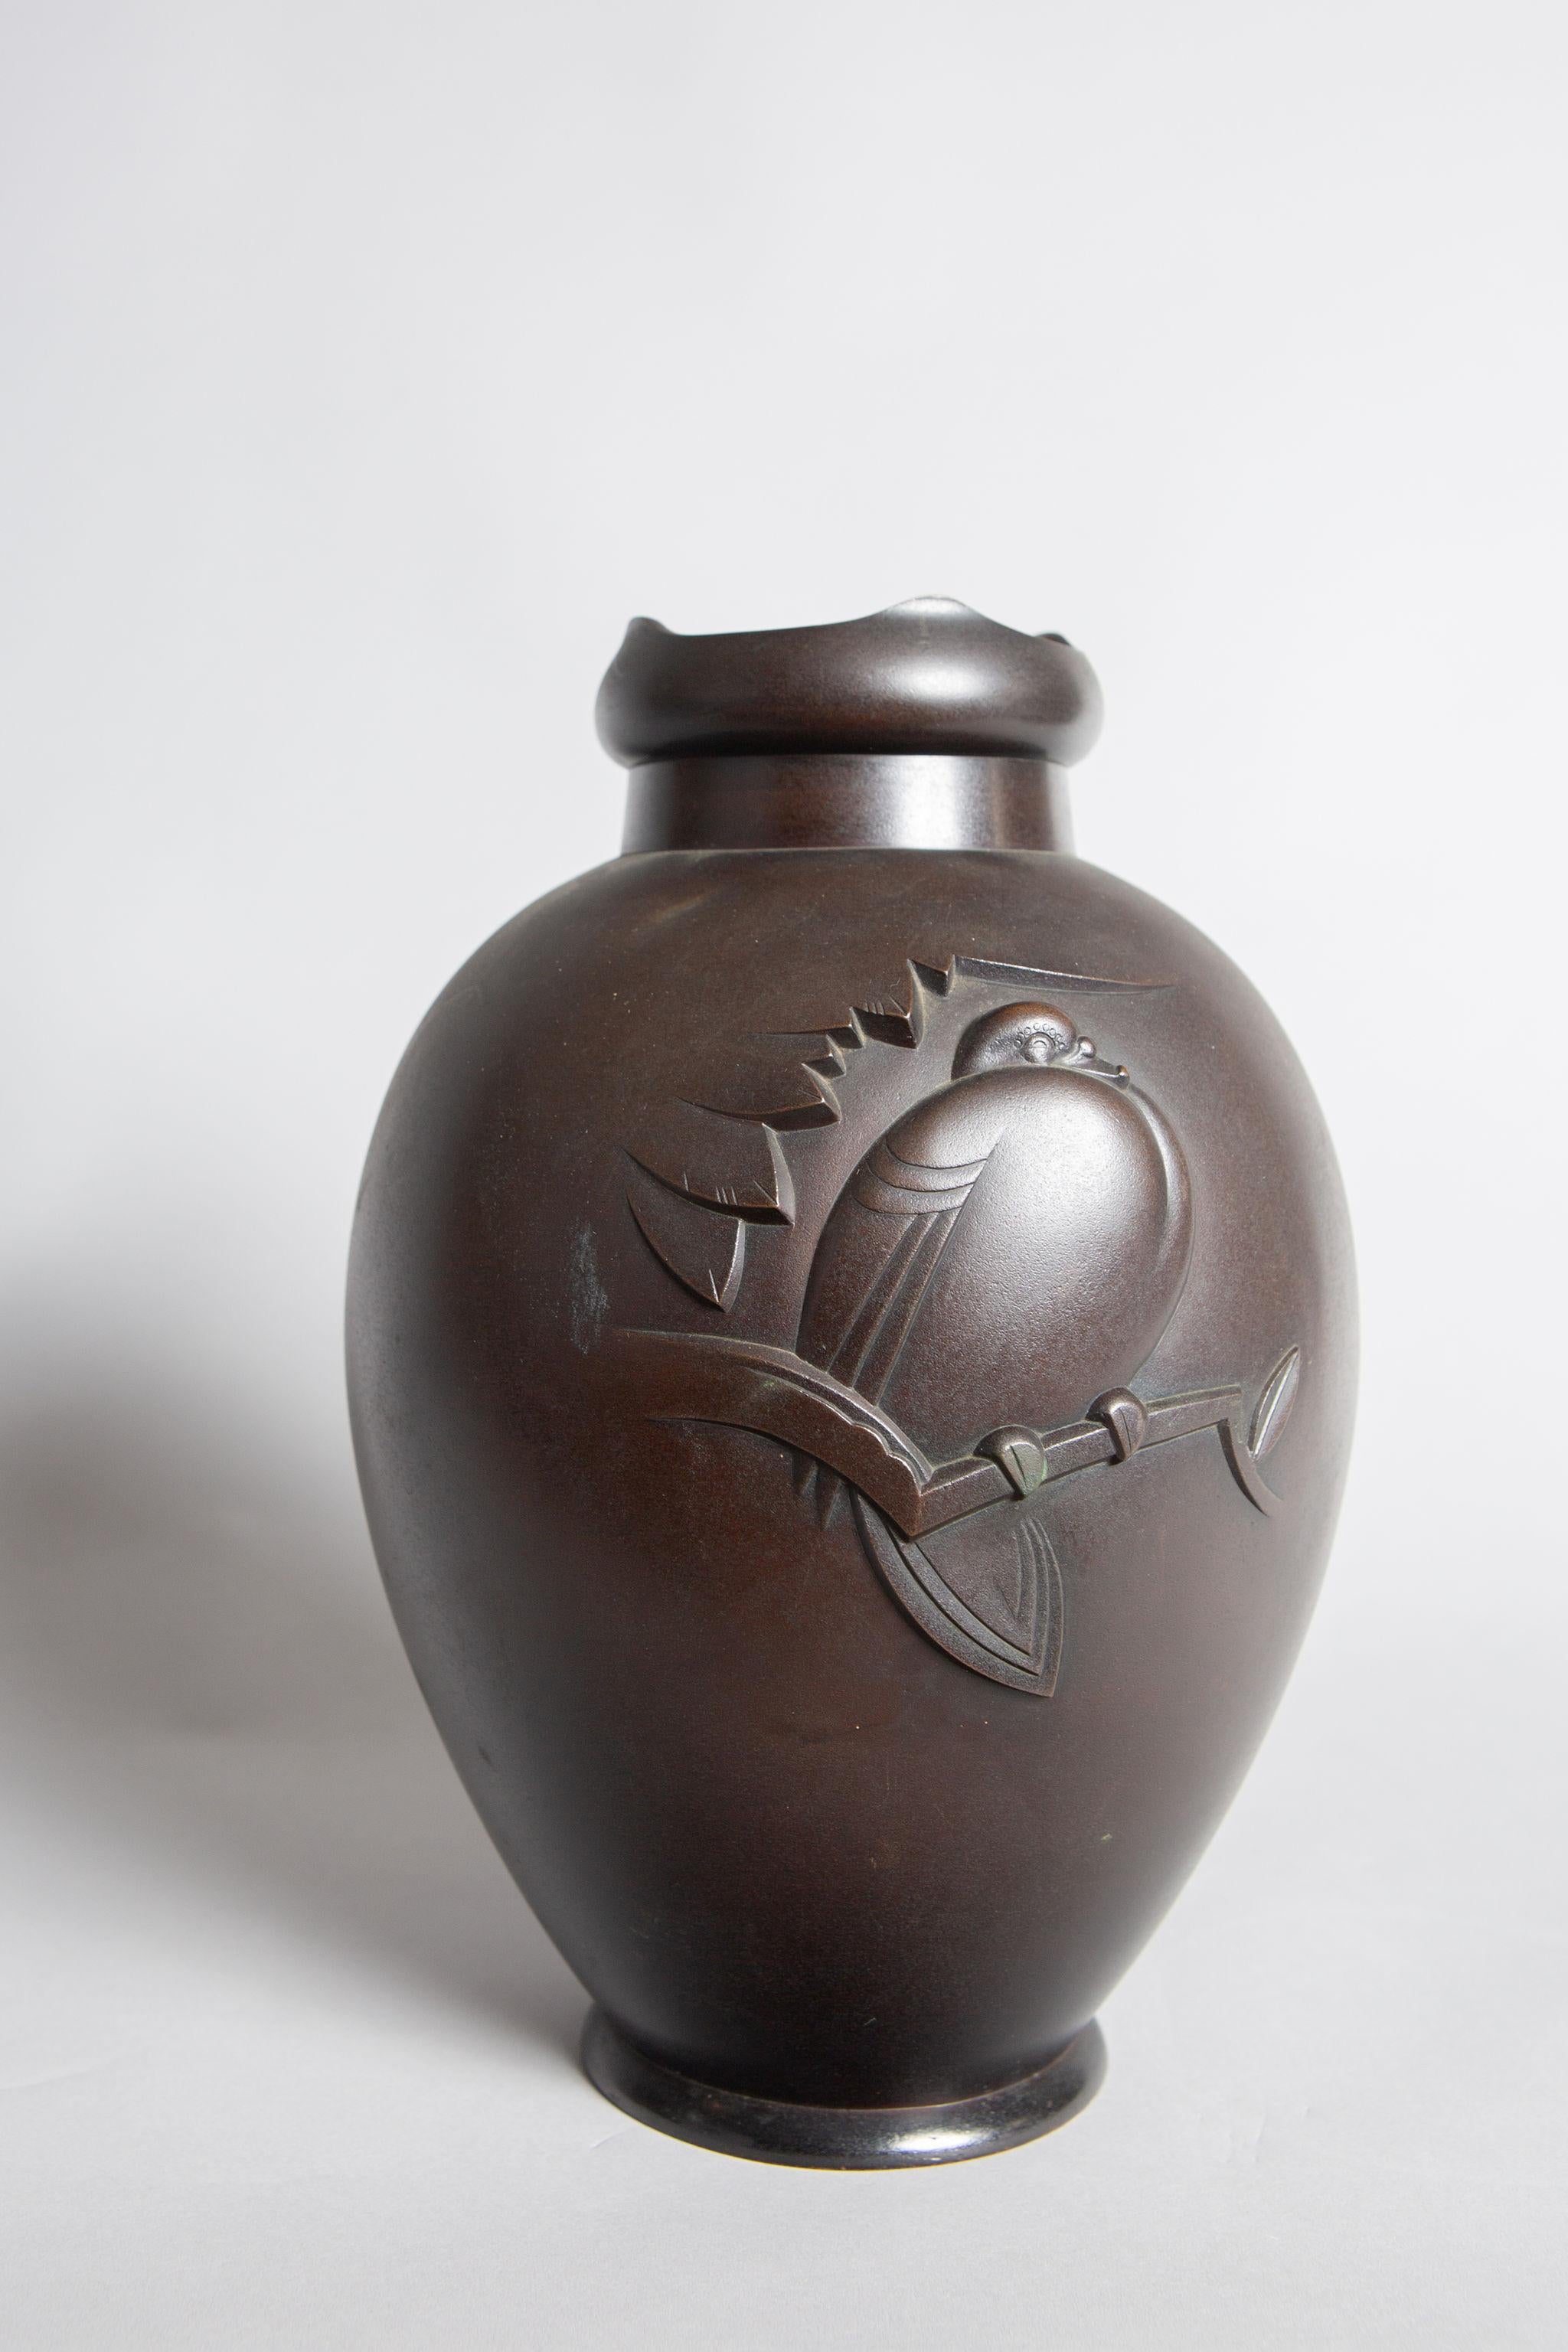 Taisho period vase (1912 - 1926) with abstract, geometric vignette of a pigeon resting on a branch. Interesting crown shaped silouhette on top. Signature reads: Sadatsugu. Has two minor dents, priced accordingly.